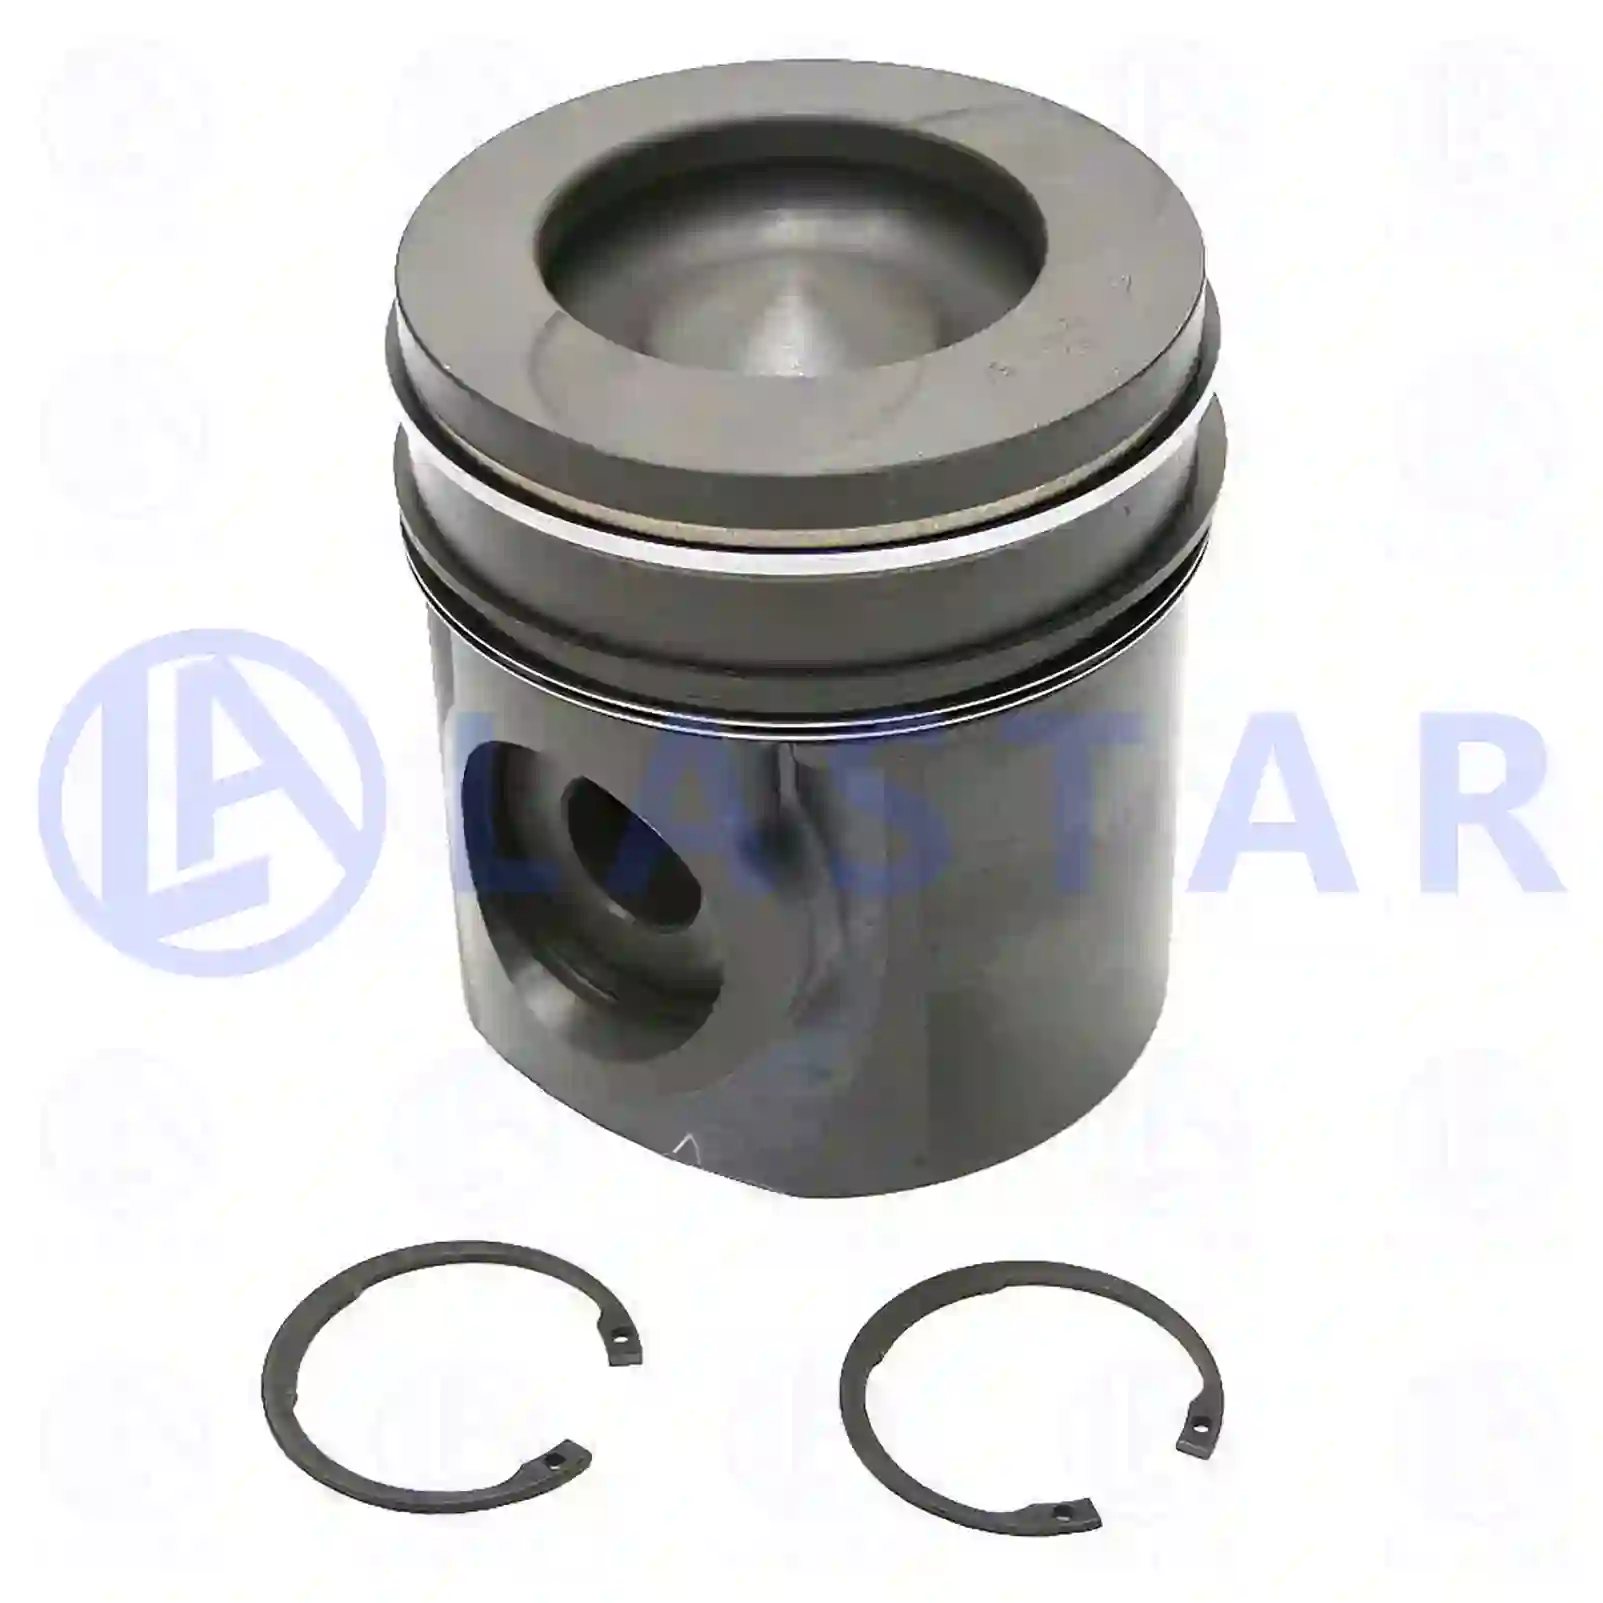 Piston, complete with rings, 77701787, 1383880, 1393166, 1393168 ||  77701787 Lastar Spare Part | Truck Spare Parts, Auotomotive Spare Parts Piston, complete with rings, 77701787, 1383880, 1393166, 1393168 ||  77701787 Lastar Spare Part | Truck Spare Parts, Auotomotive Spare Parts